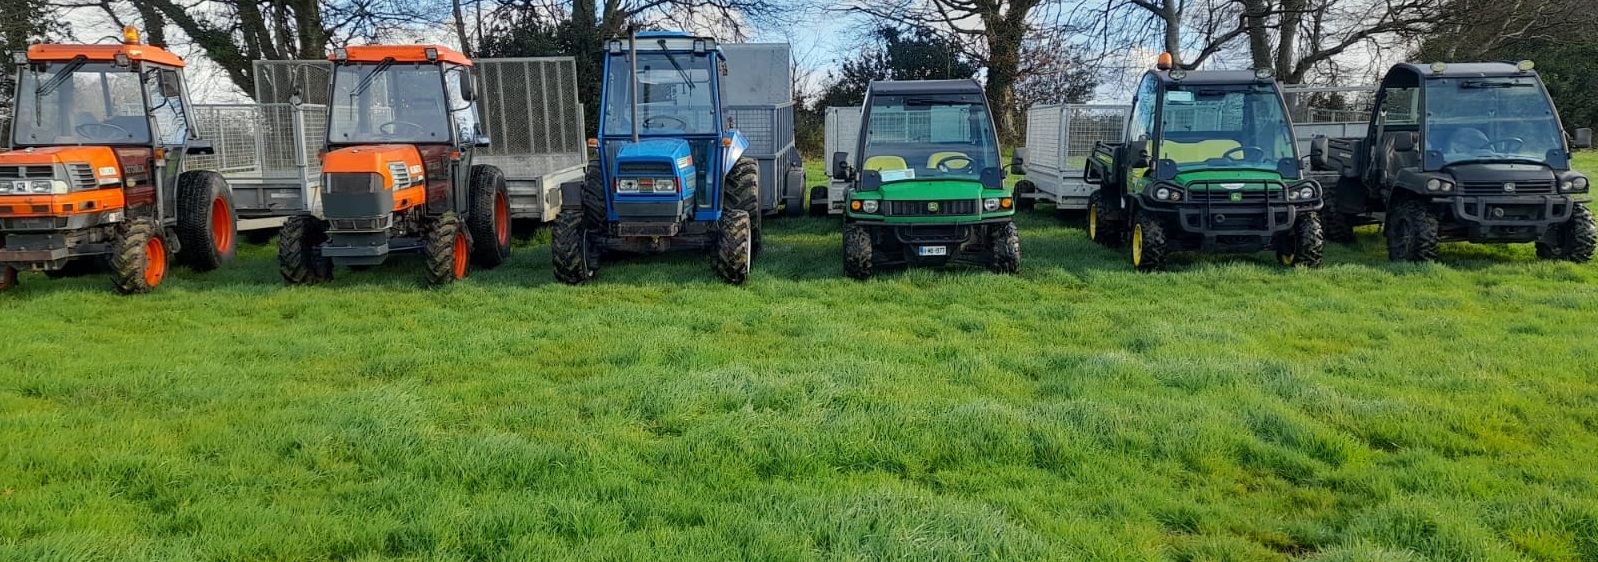 Tractor Gator Buggy Trailer For Hire